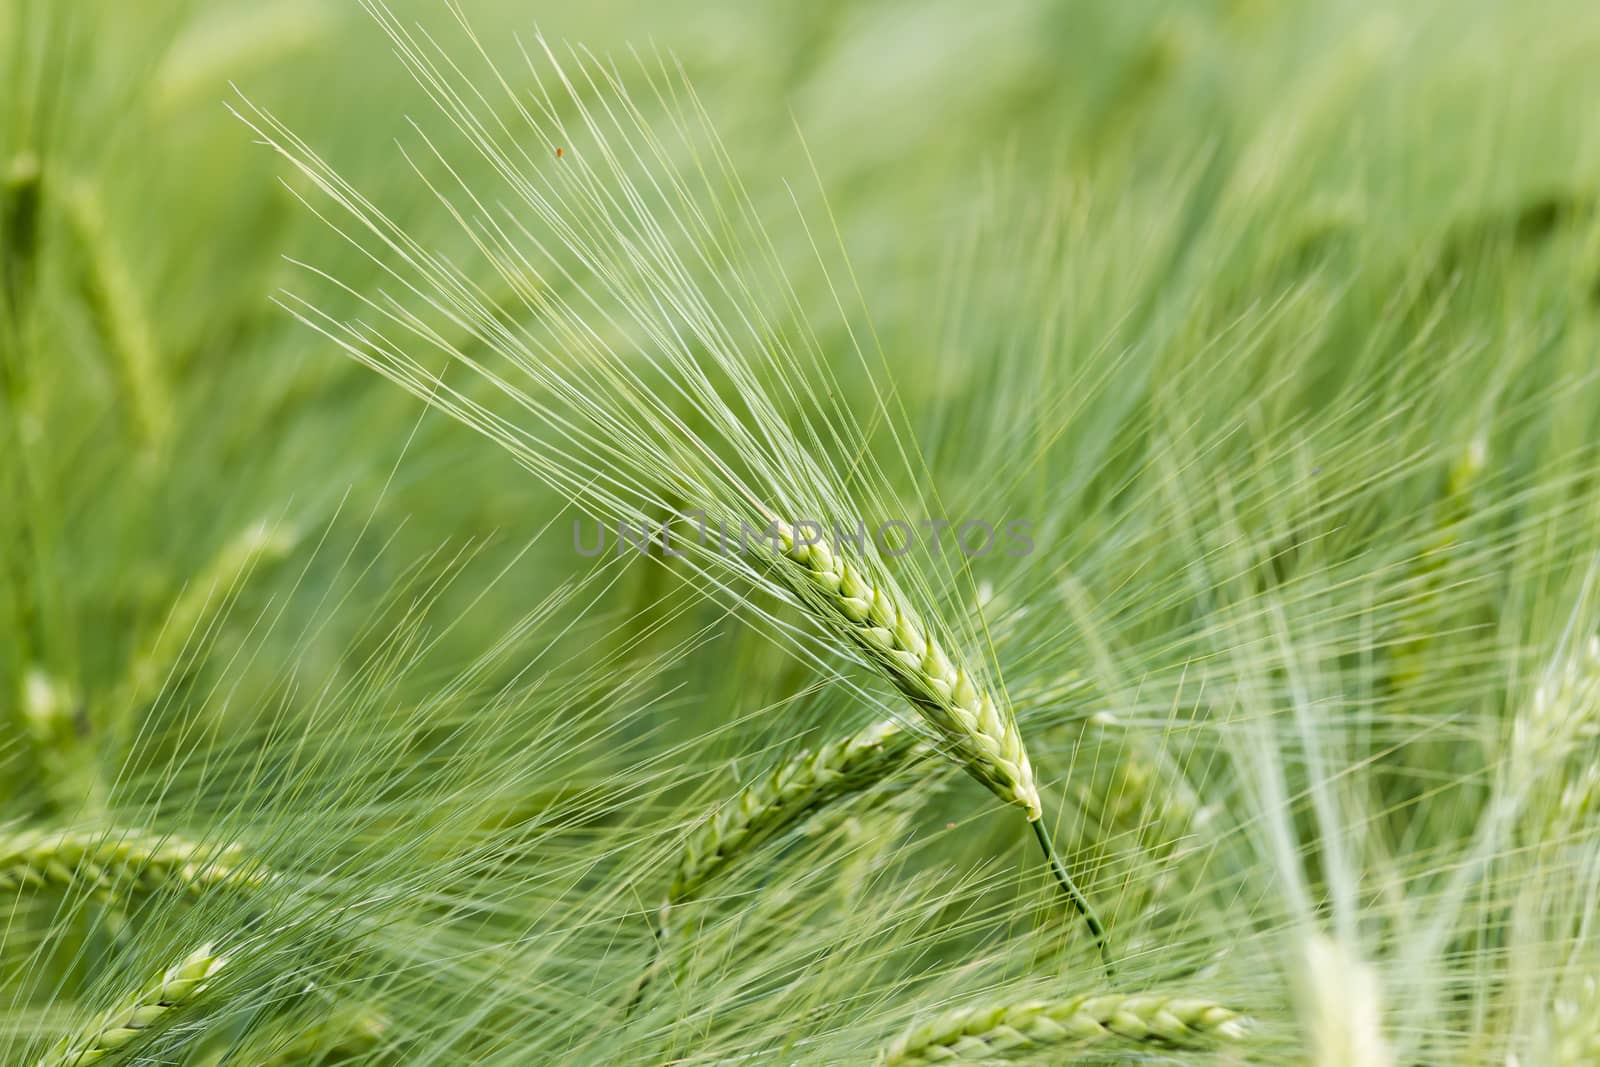 Green cereal on a grain field in spring